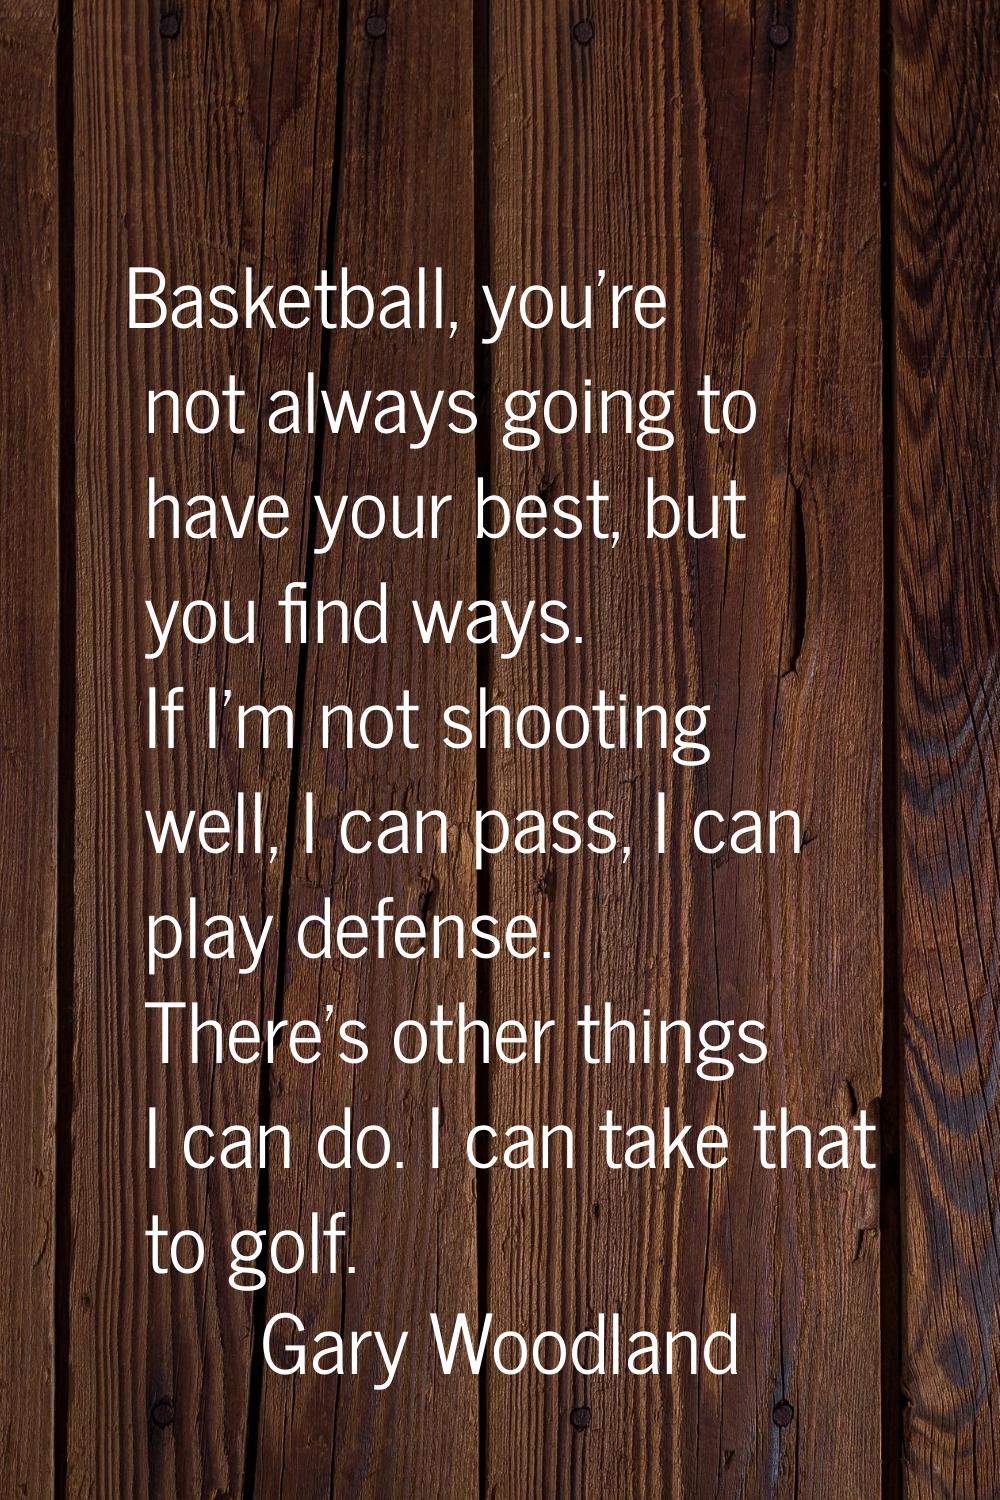 Basketball, you're not always going to have your best, but you find ways. If I'm not shooting well,